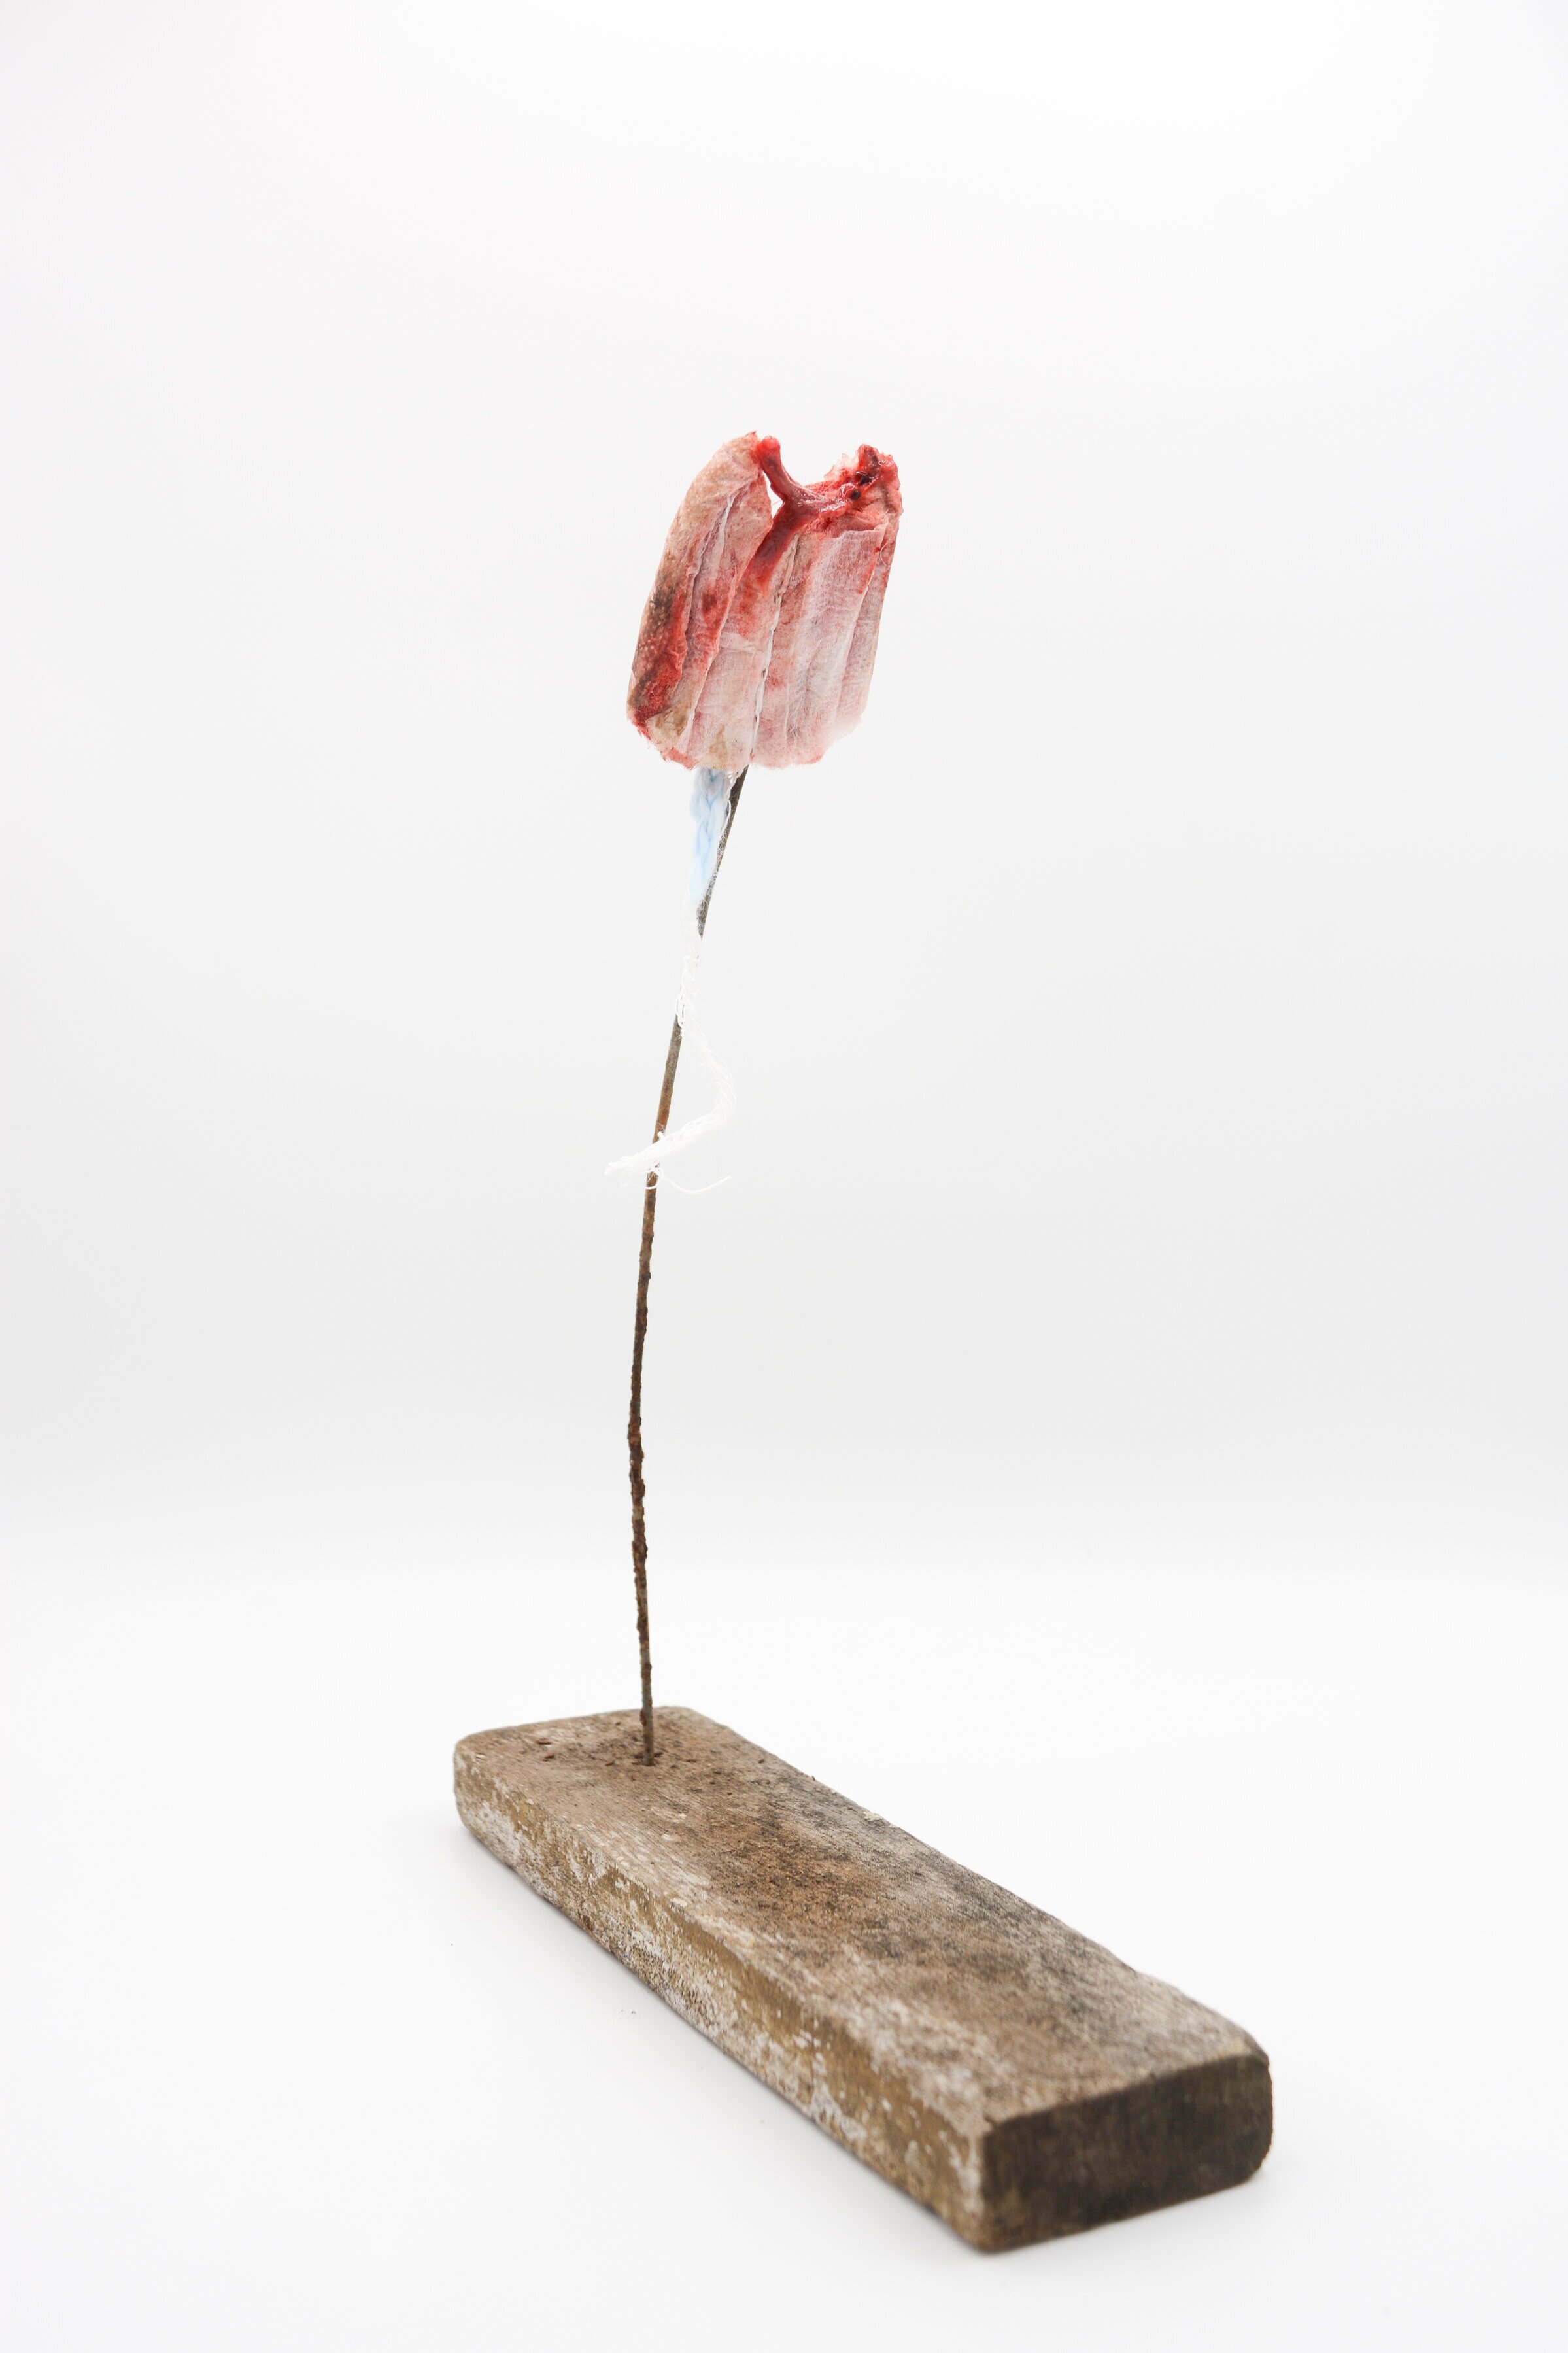  Bloody Tampon, Rusted Nail, Wooden Base 